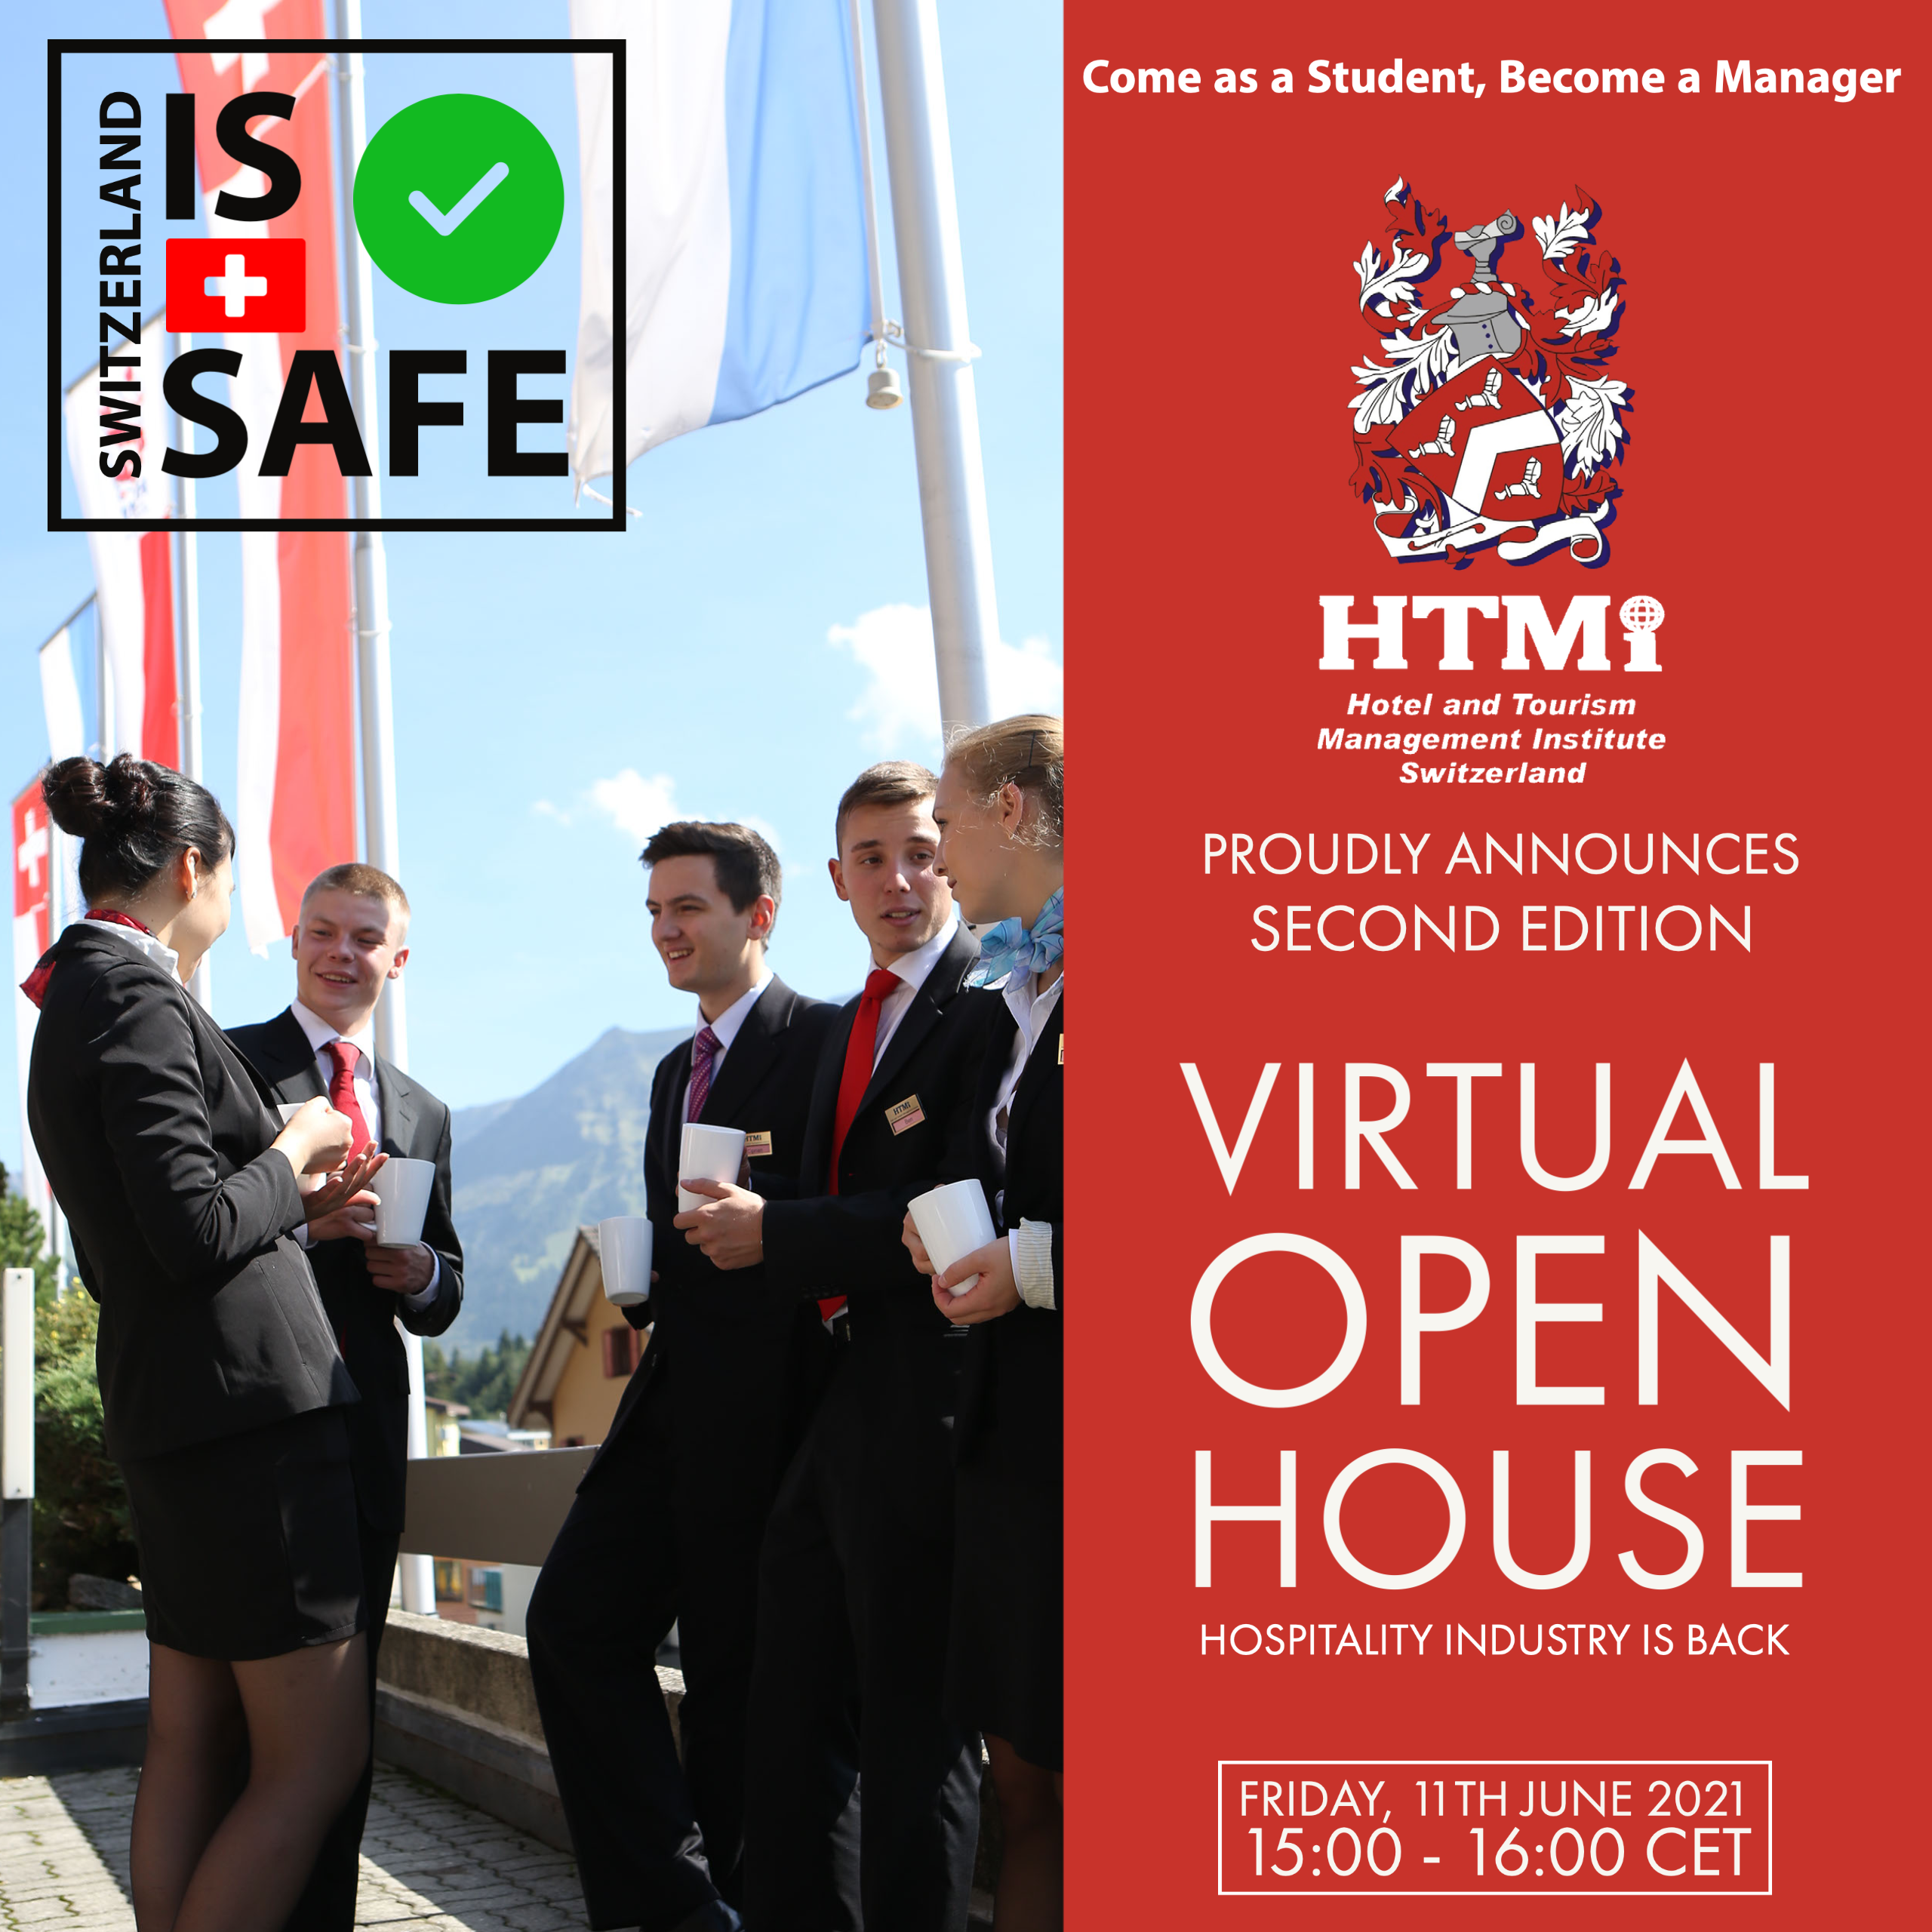 HTMi Switzerland proudly announces the second edition of Virtual Open House.